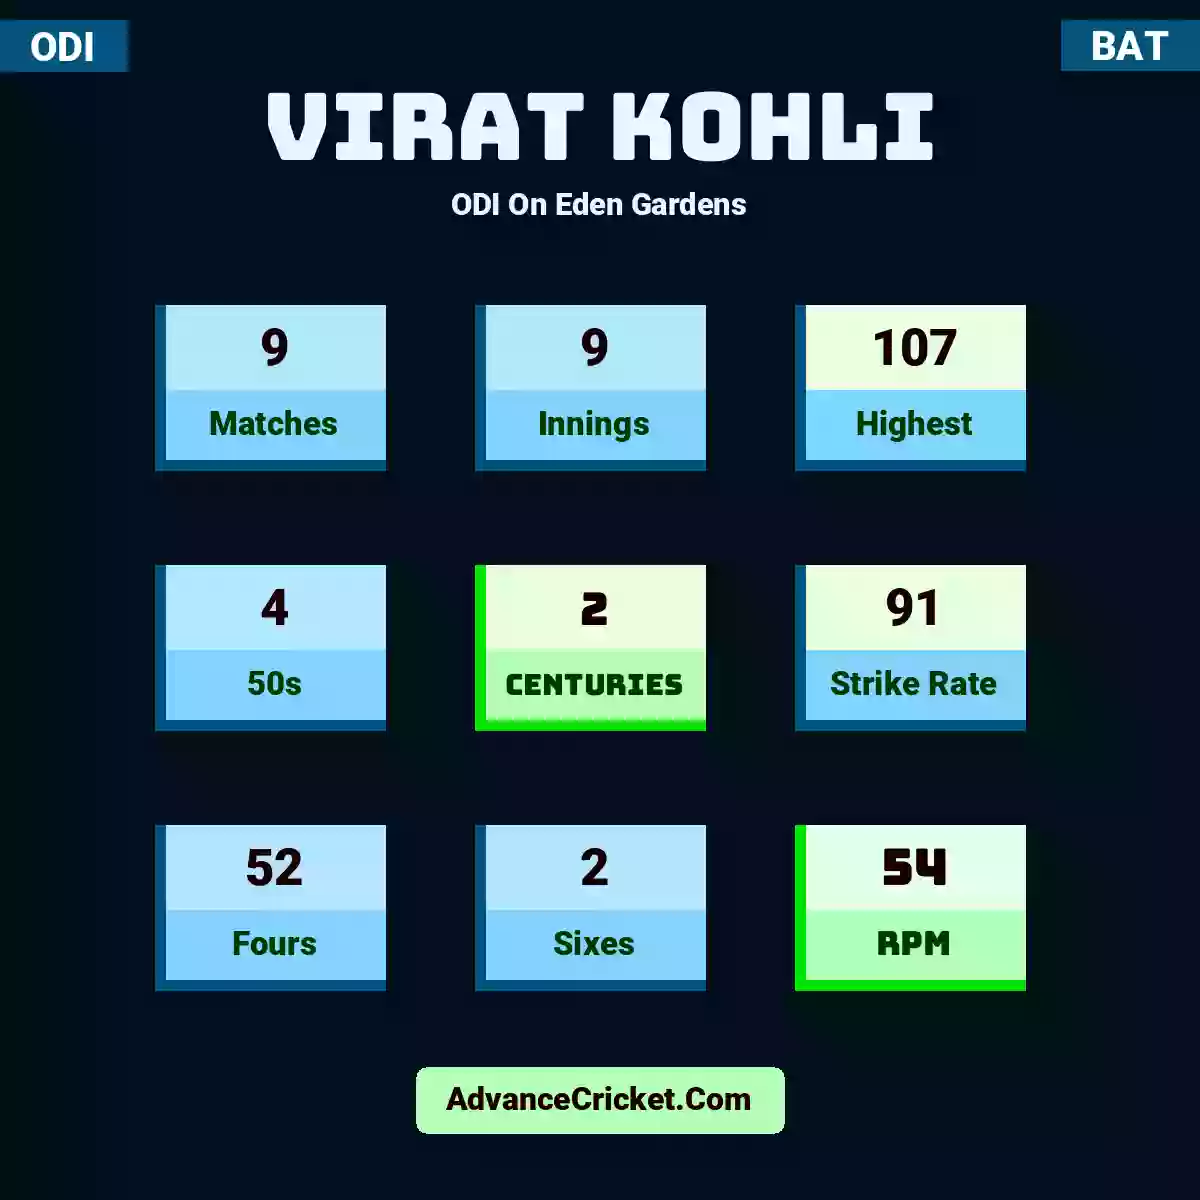 Virat Kohli ODI  On Eden Gardens, Virat Kohli played 9 matches, scored 107 runs as highest, 4 half-centuries, and 2 centuries, with a strike rate of 91. V.Kohli hit 52 fours and 2 sixes, with an RPM of 54.